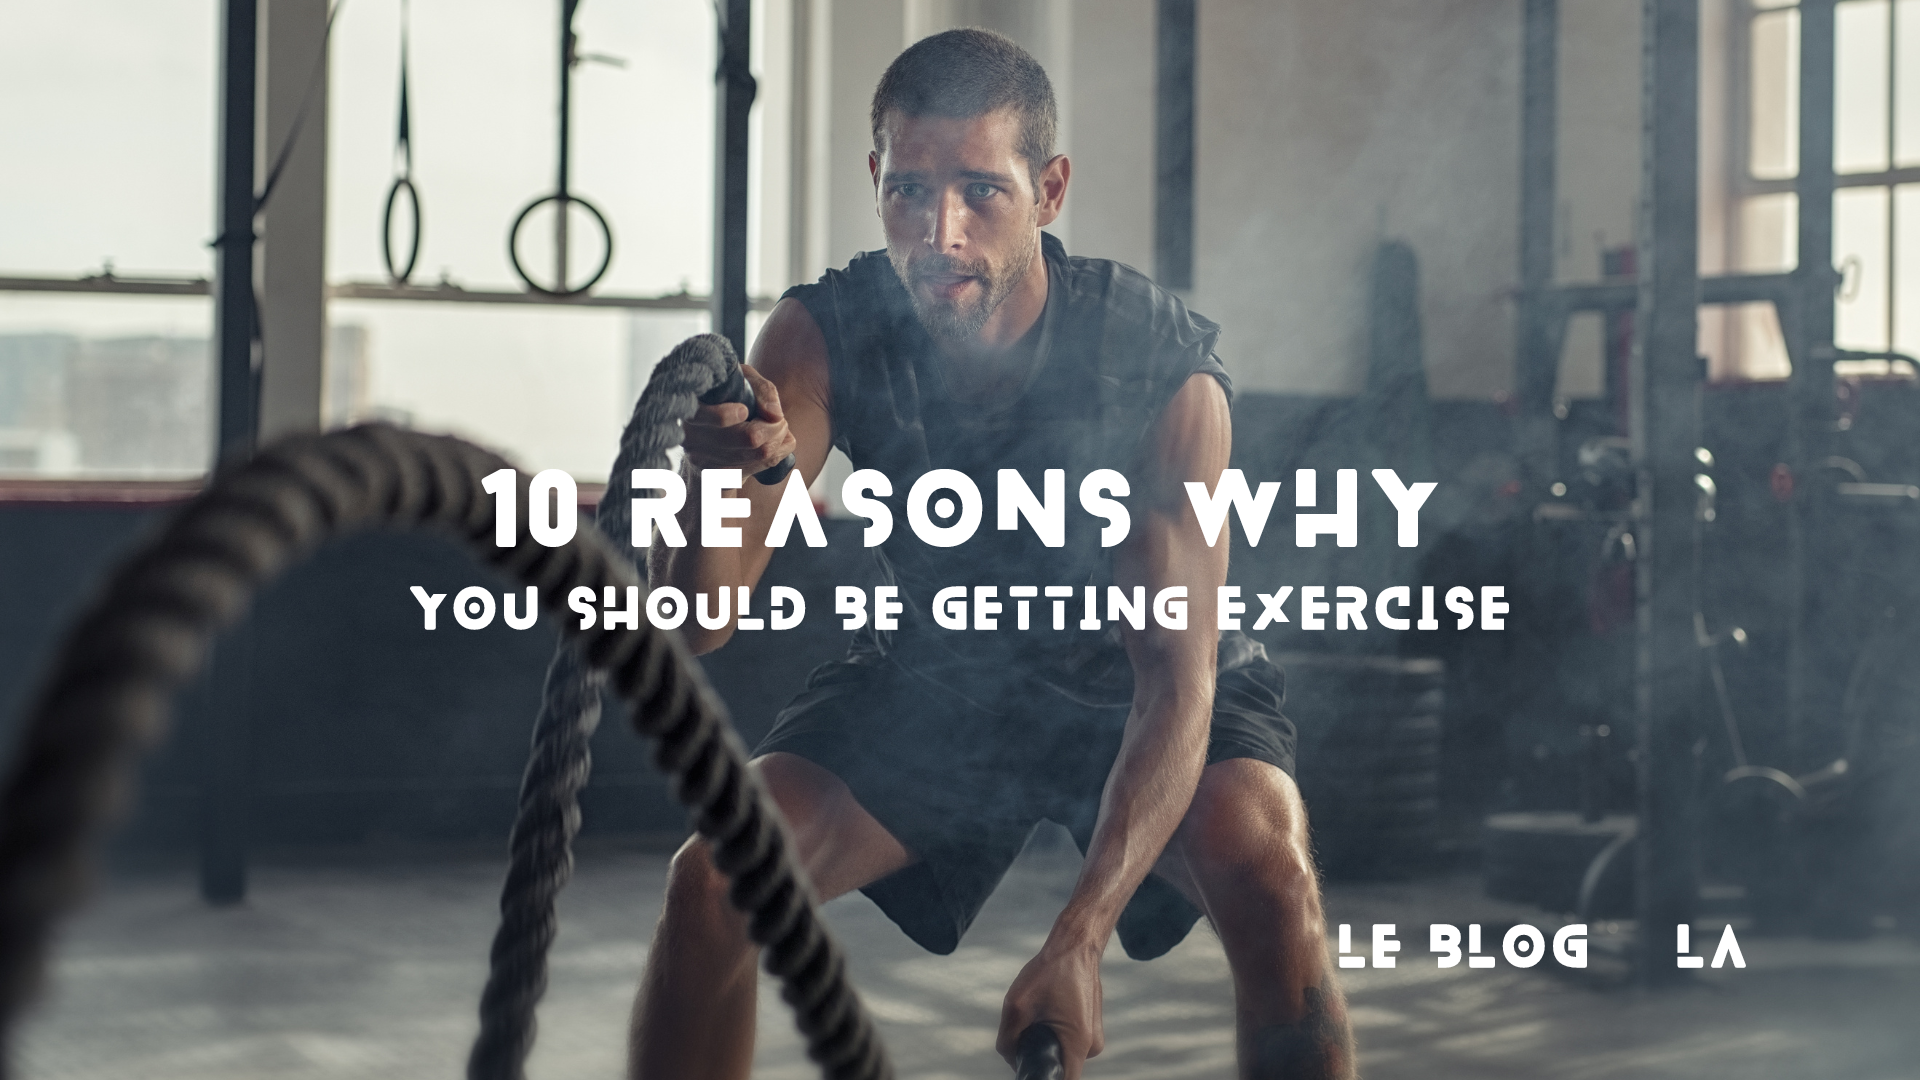 10 Reasons Why You Should Be Getting Exercise